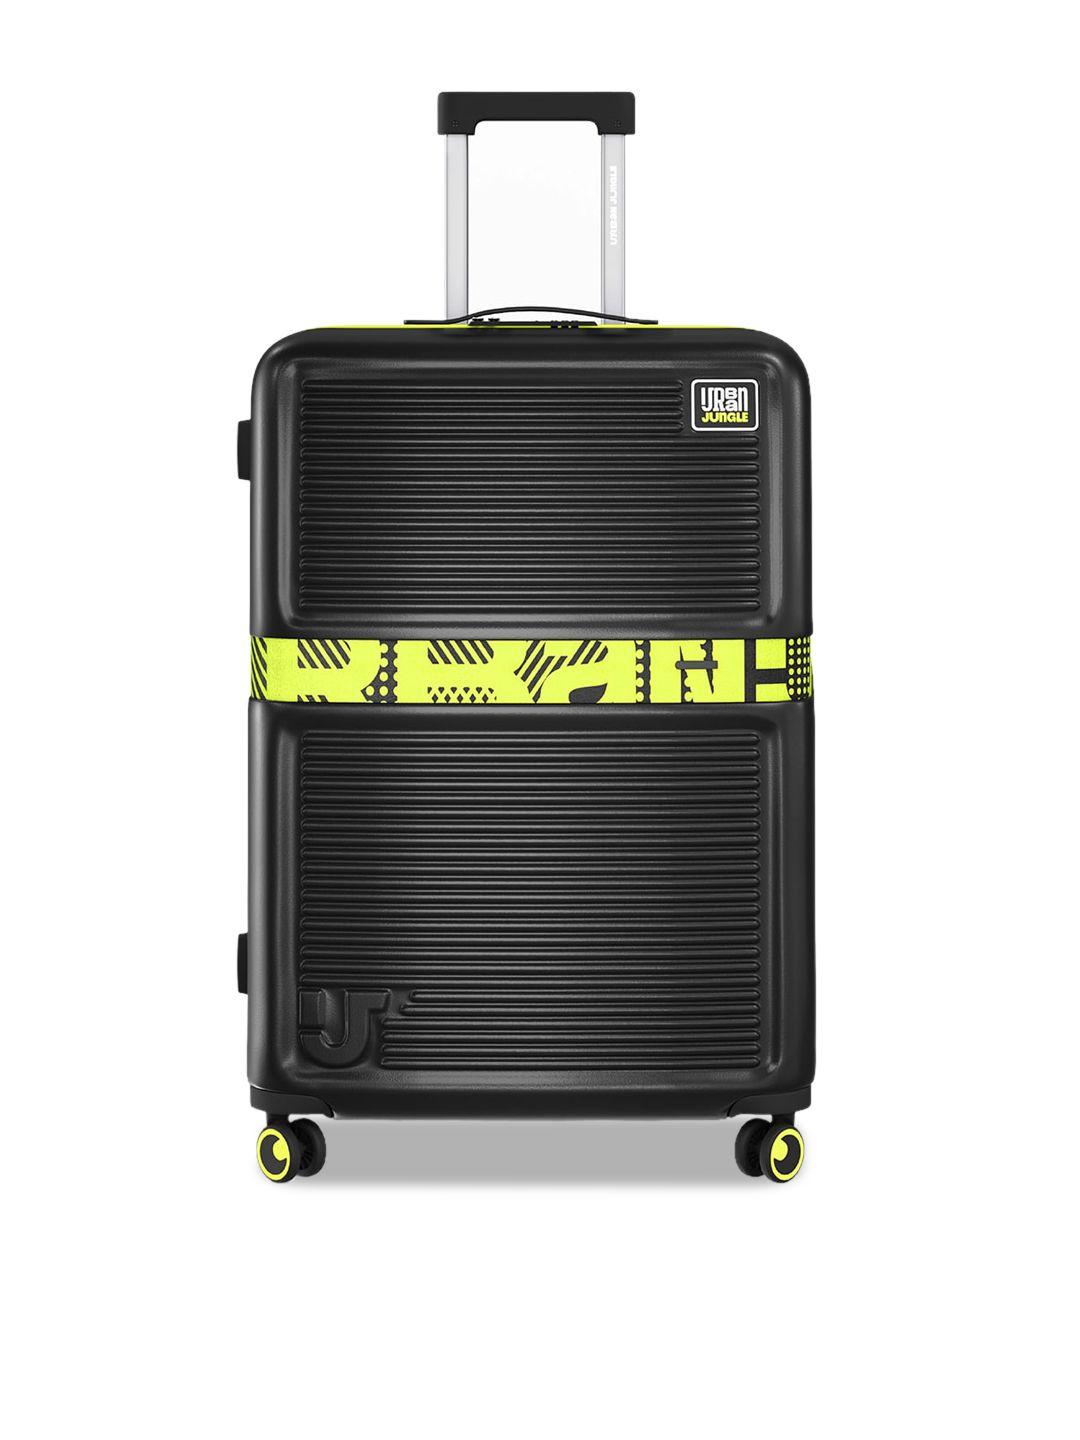 urban jungle textured hard sided large trolley suitcase